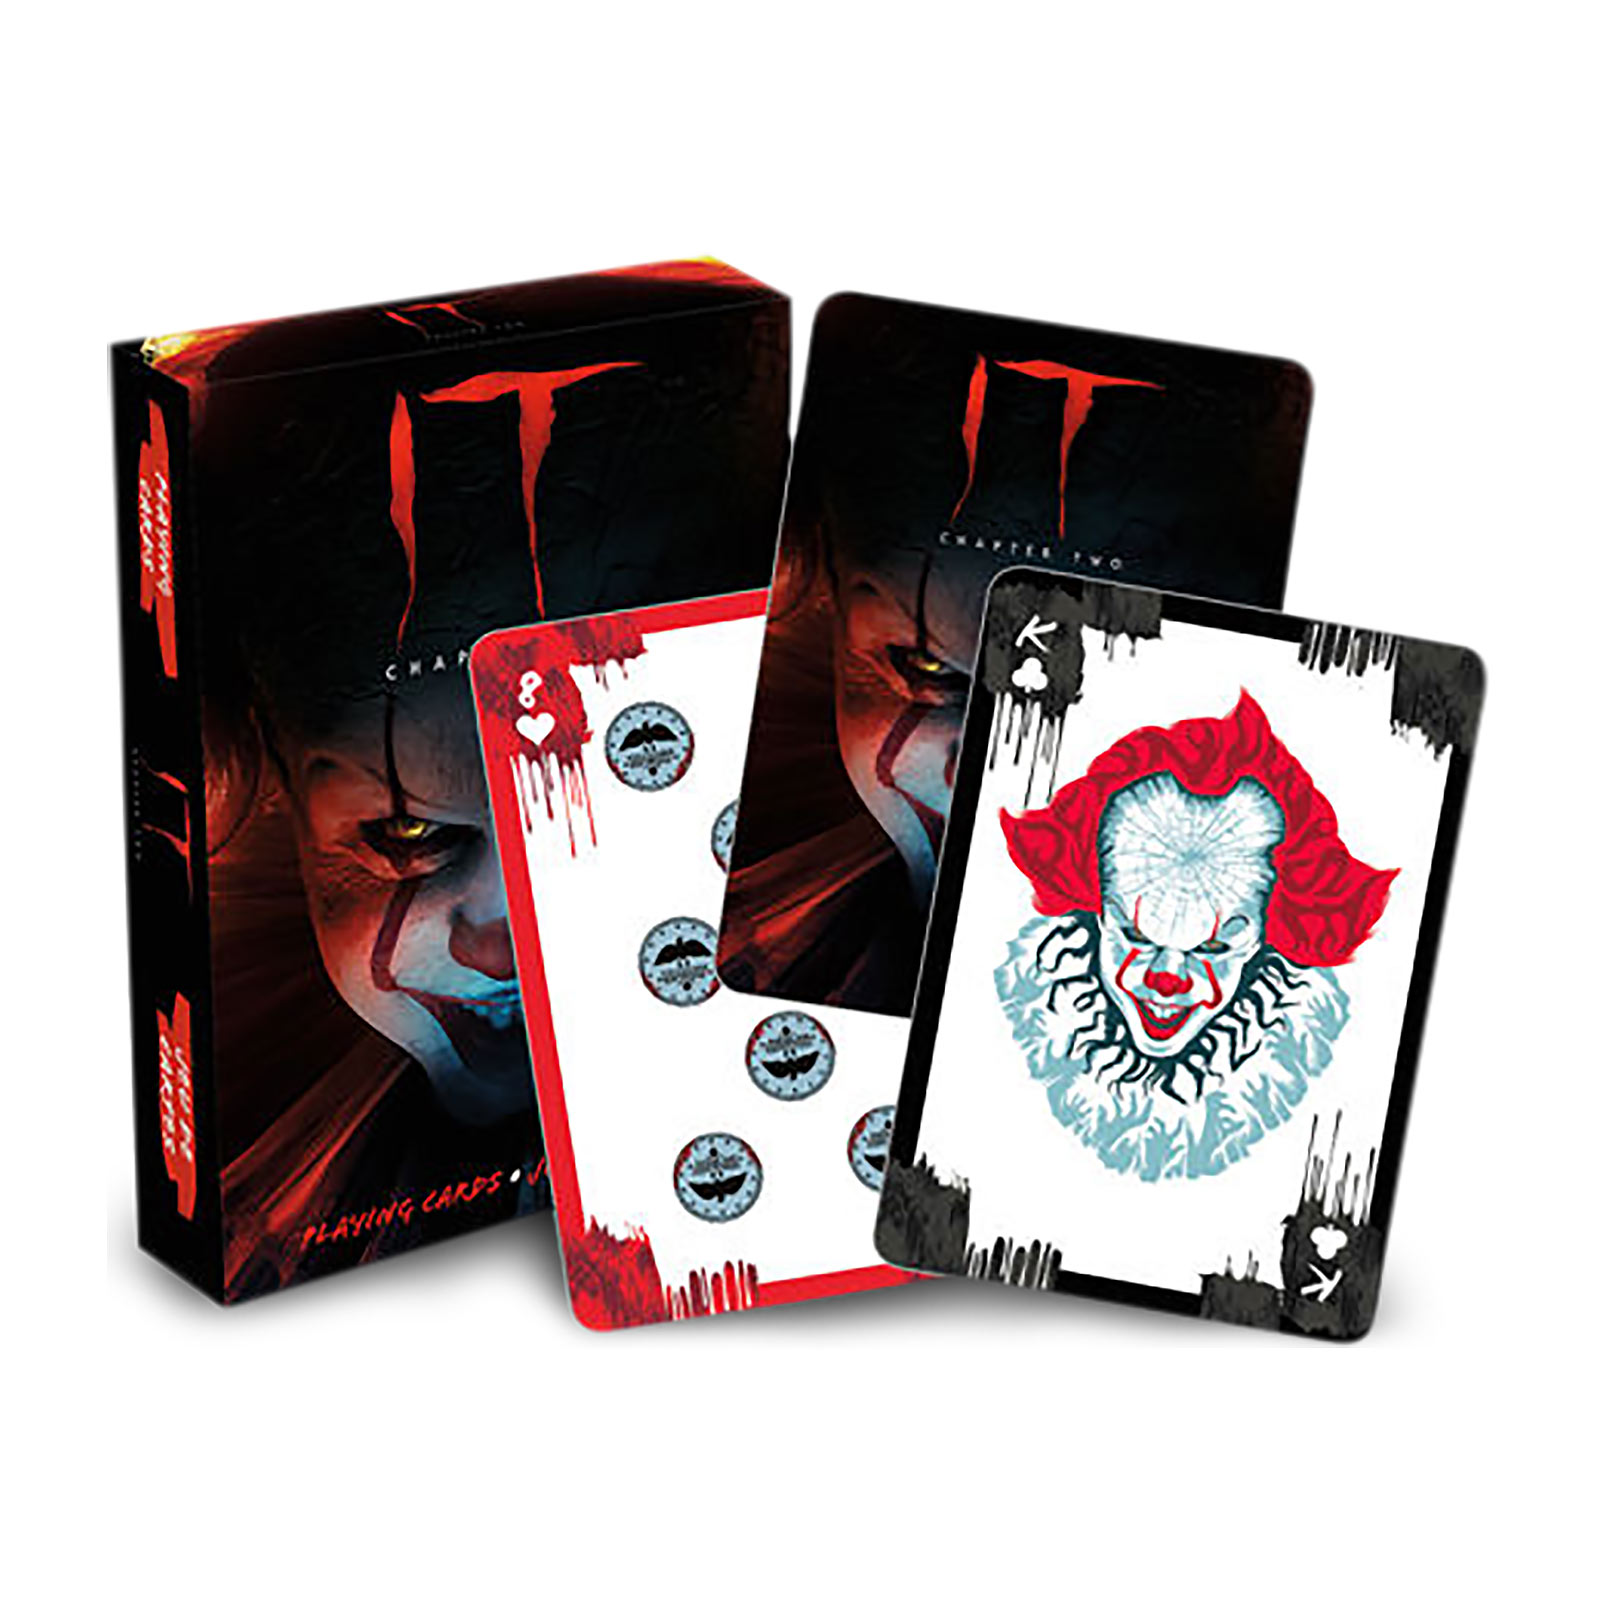 Stephen King's IT - Pennywise Card Game